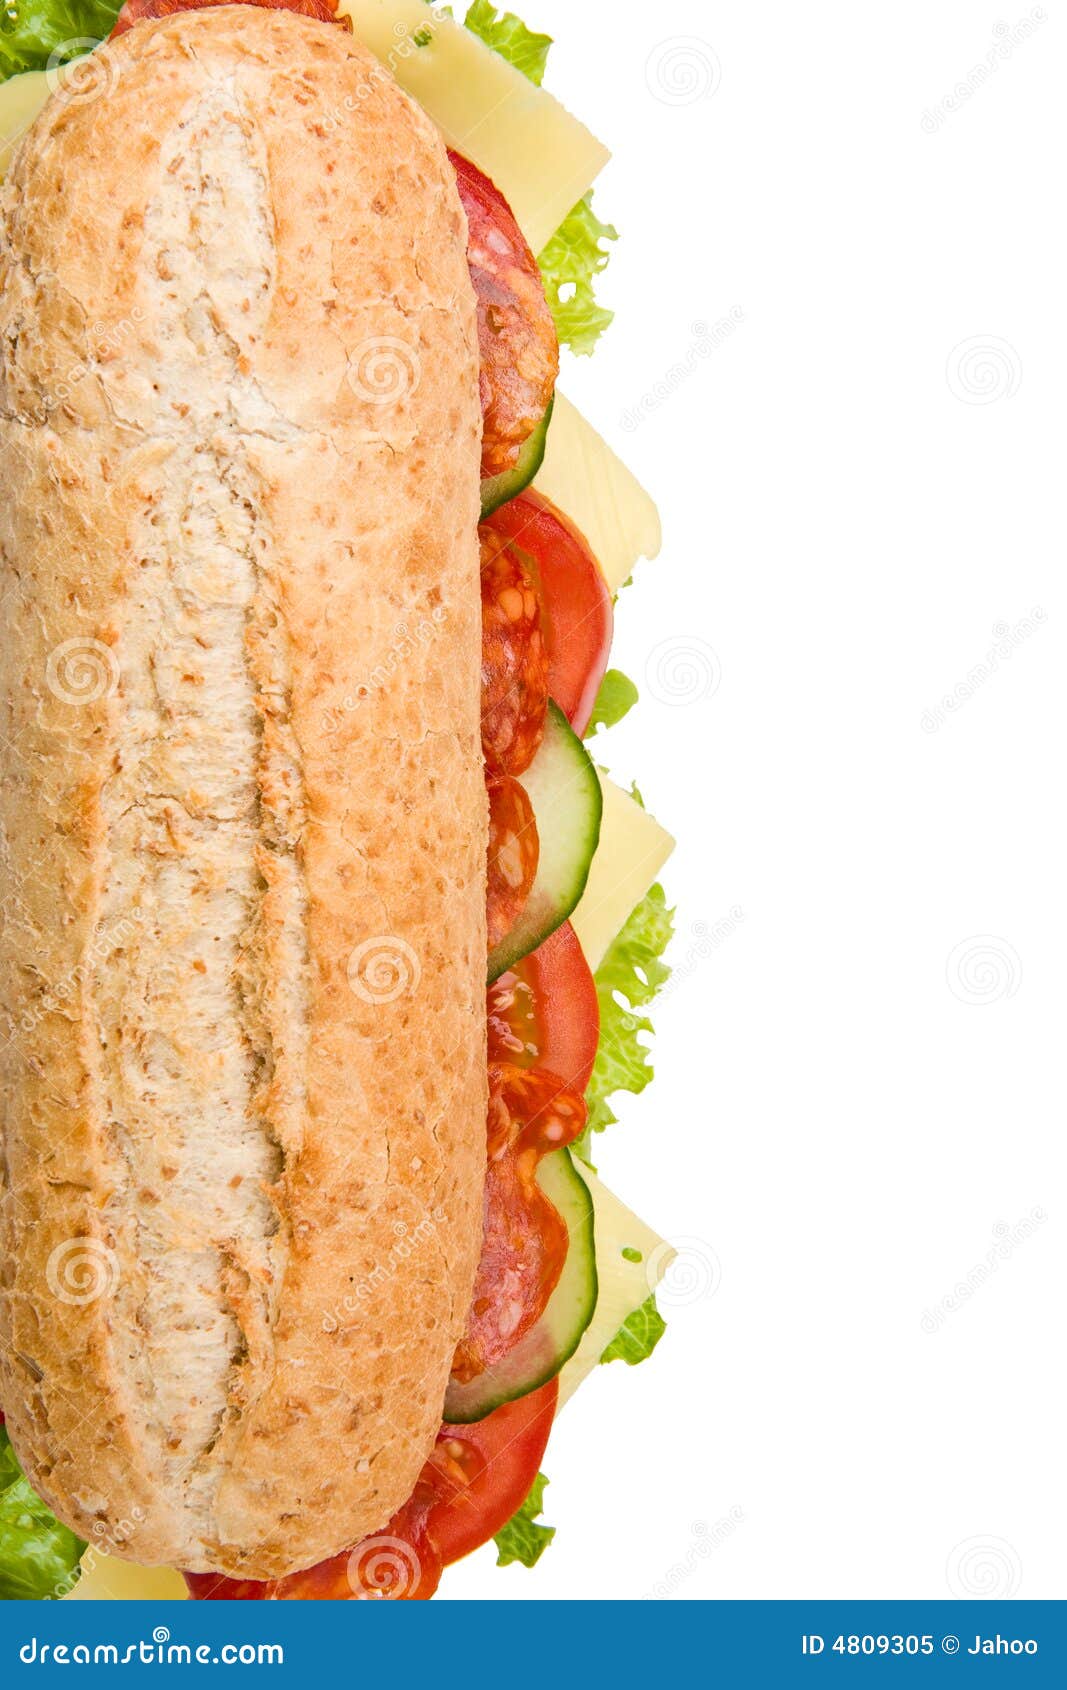 430+ Long Sub Sandwich Stock Photos, Pictures & Royalty-Free